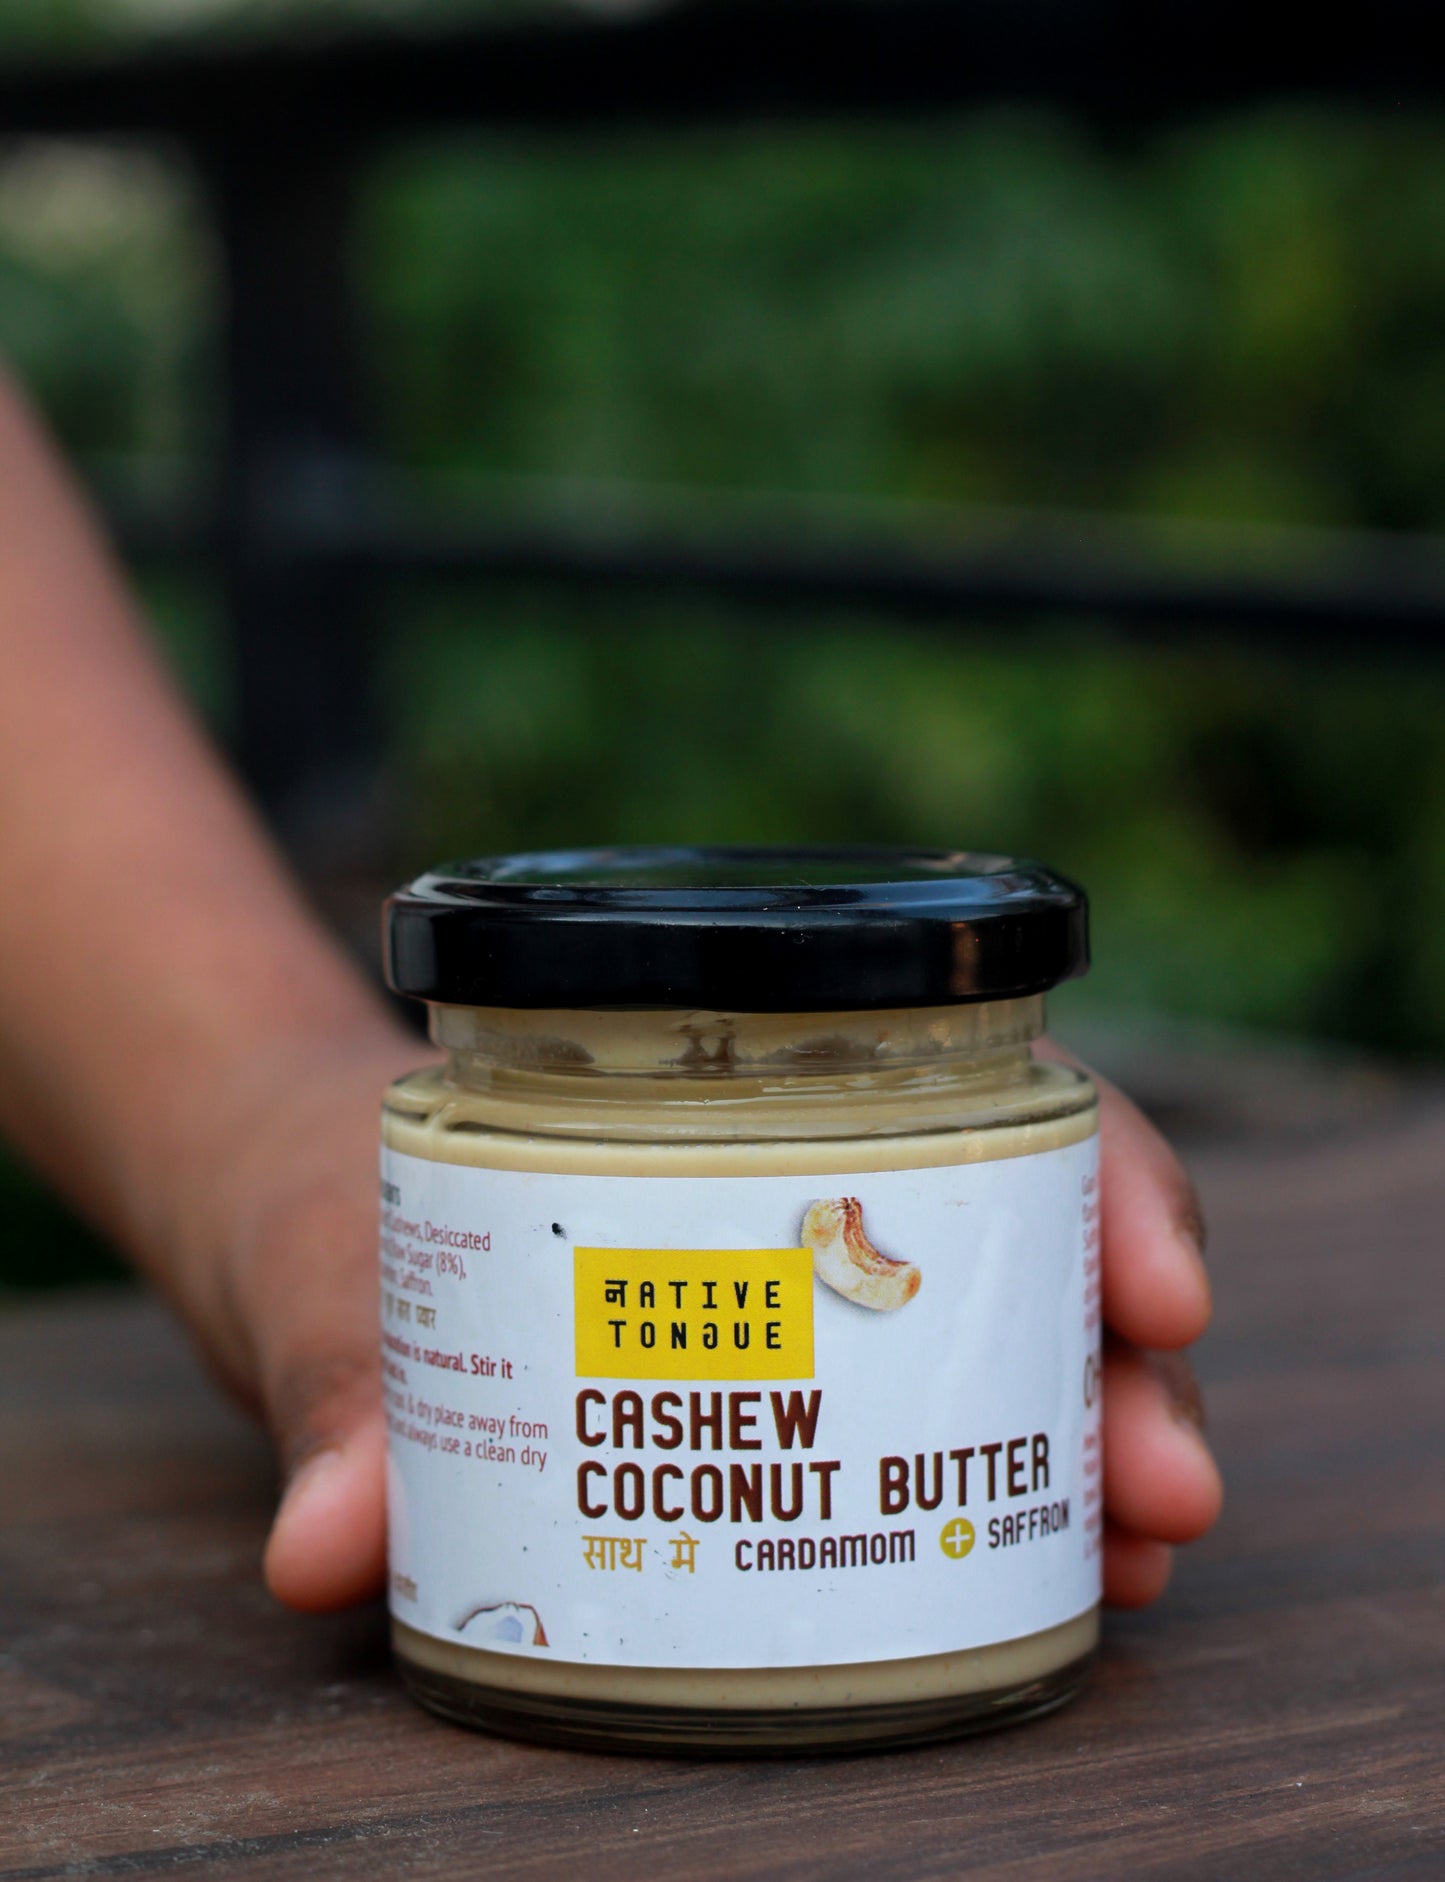 Cashew Coconut Butter With Cardamom And Saffron